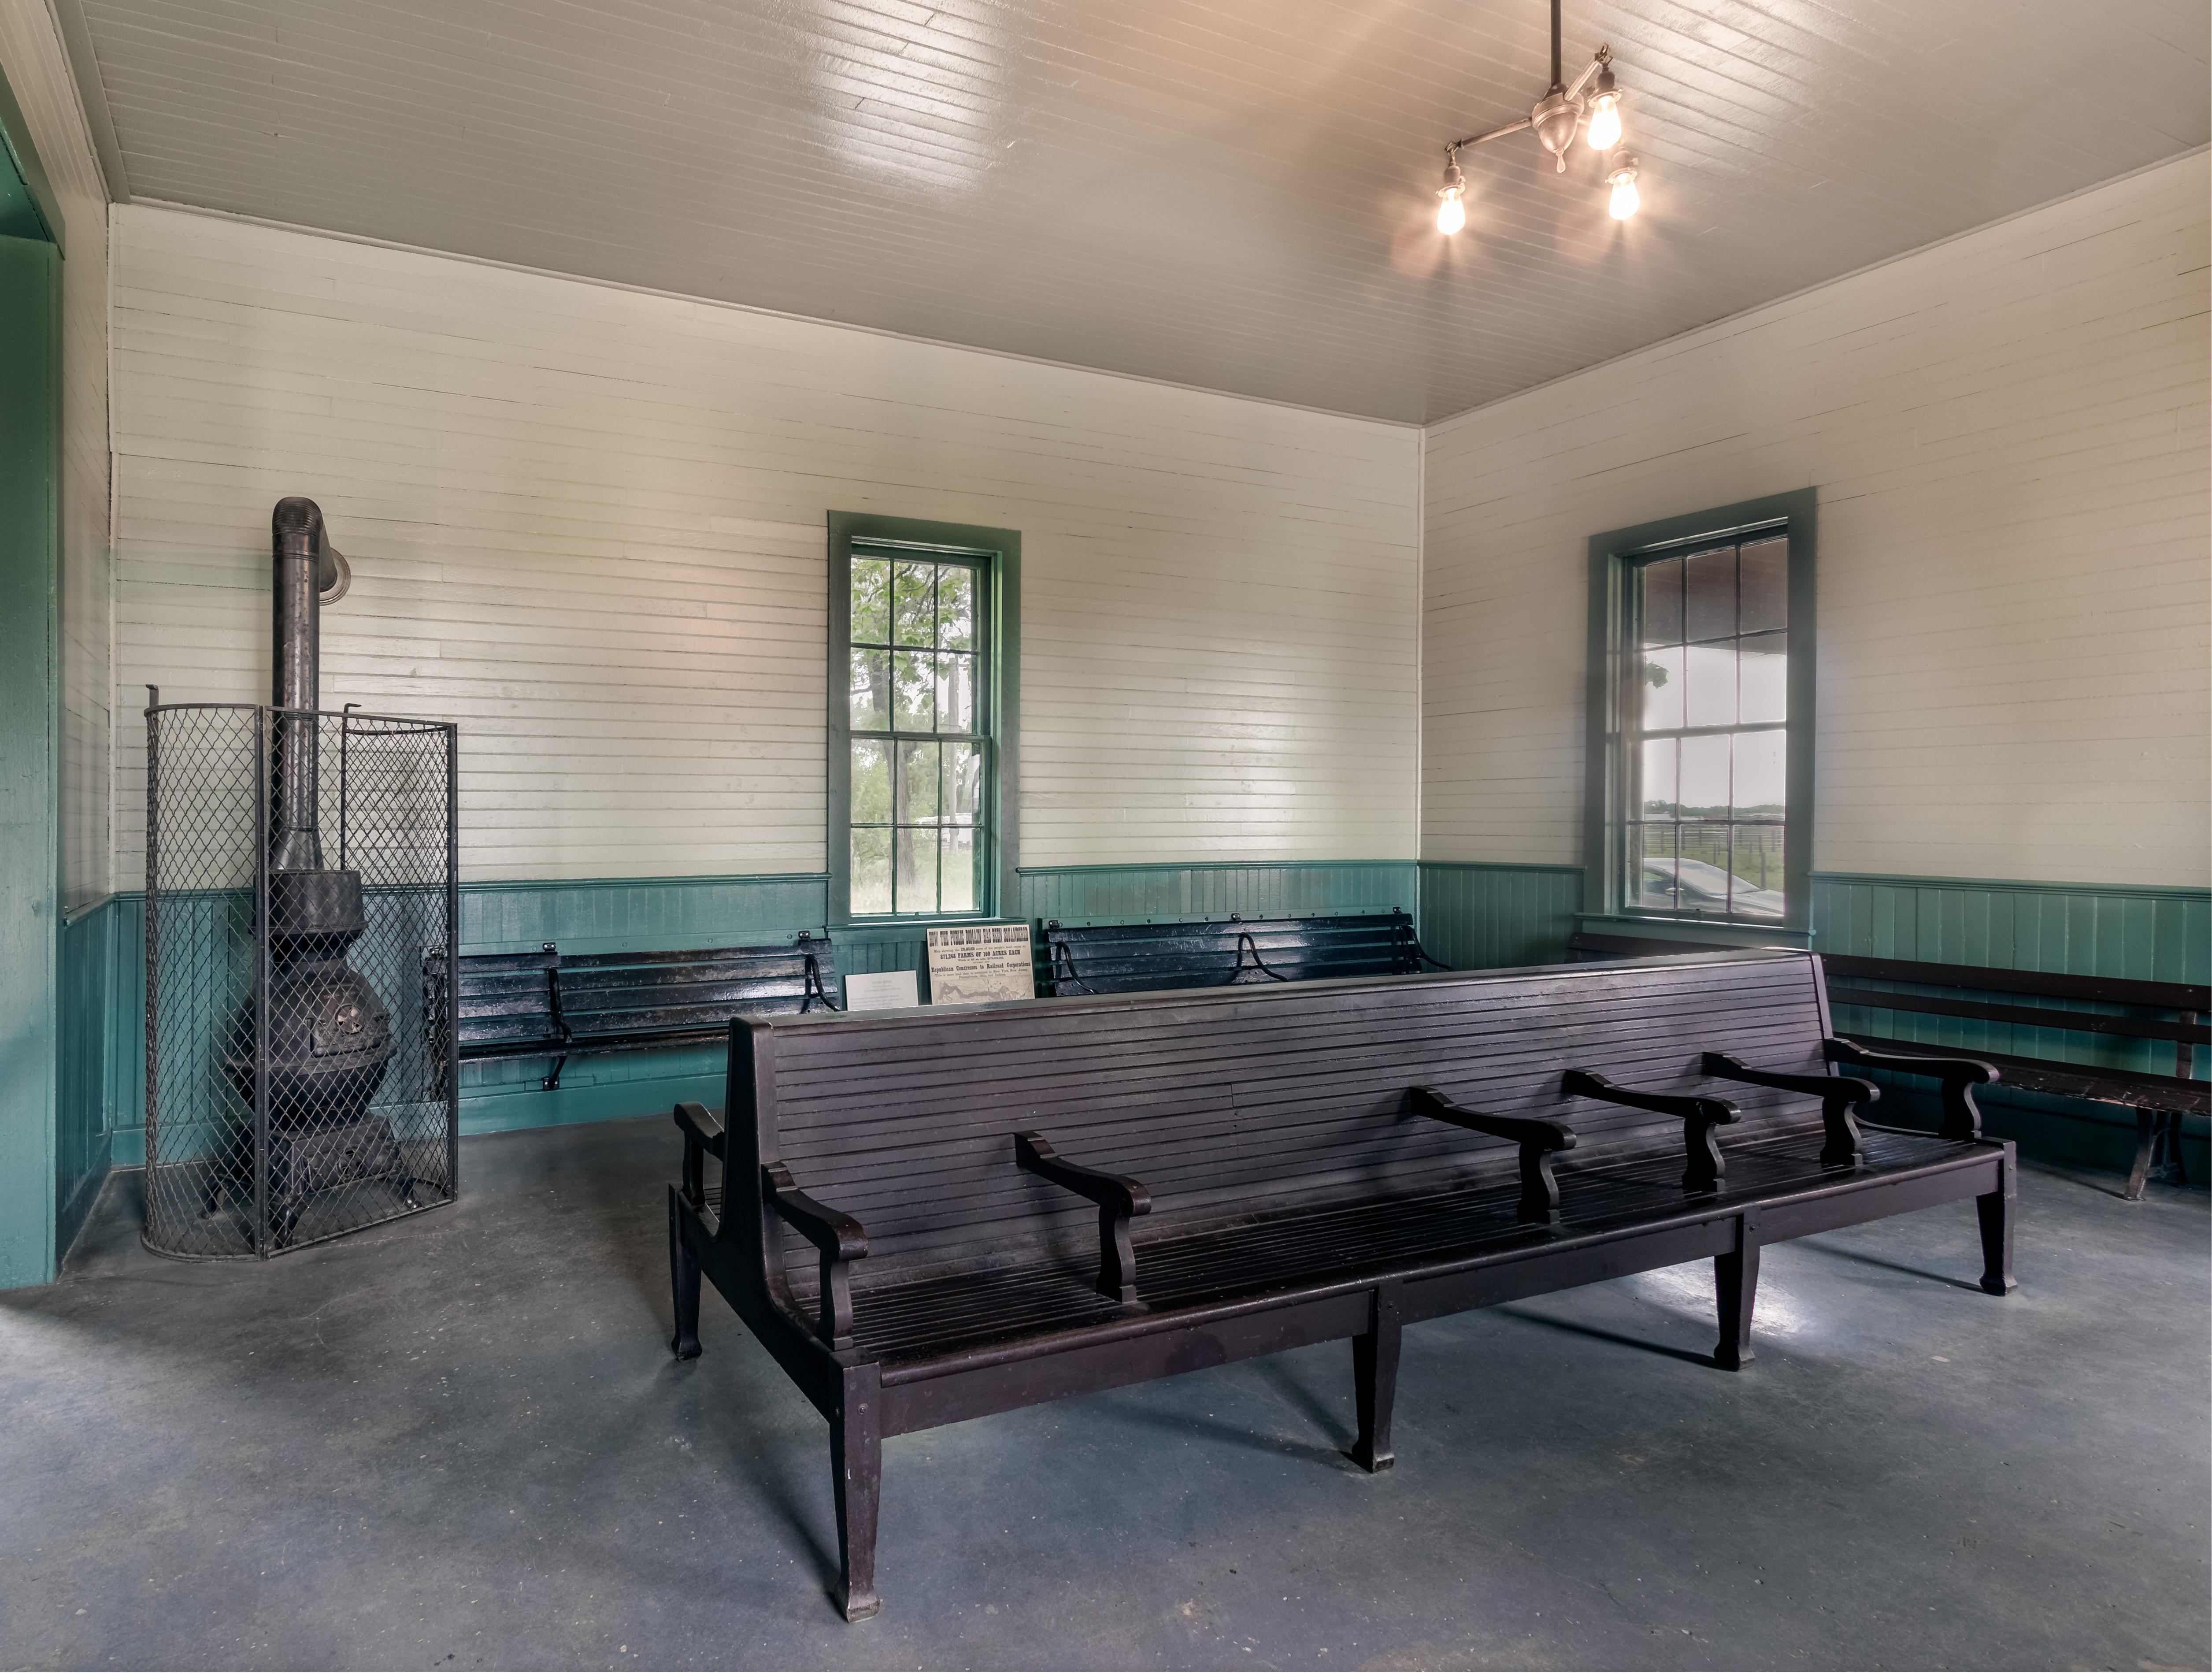 seating area in the Burlington Depot with two benches and a warming stove.